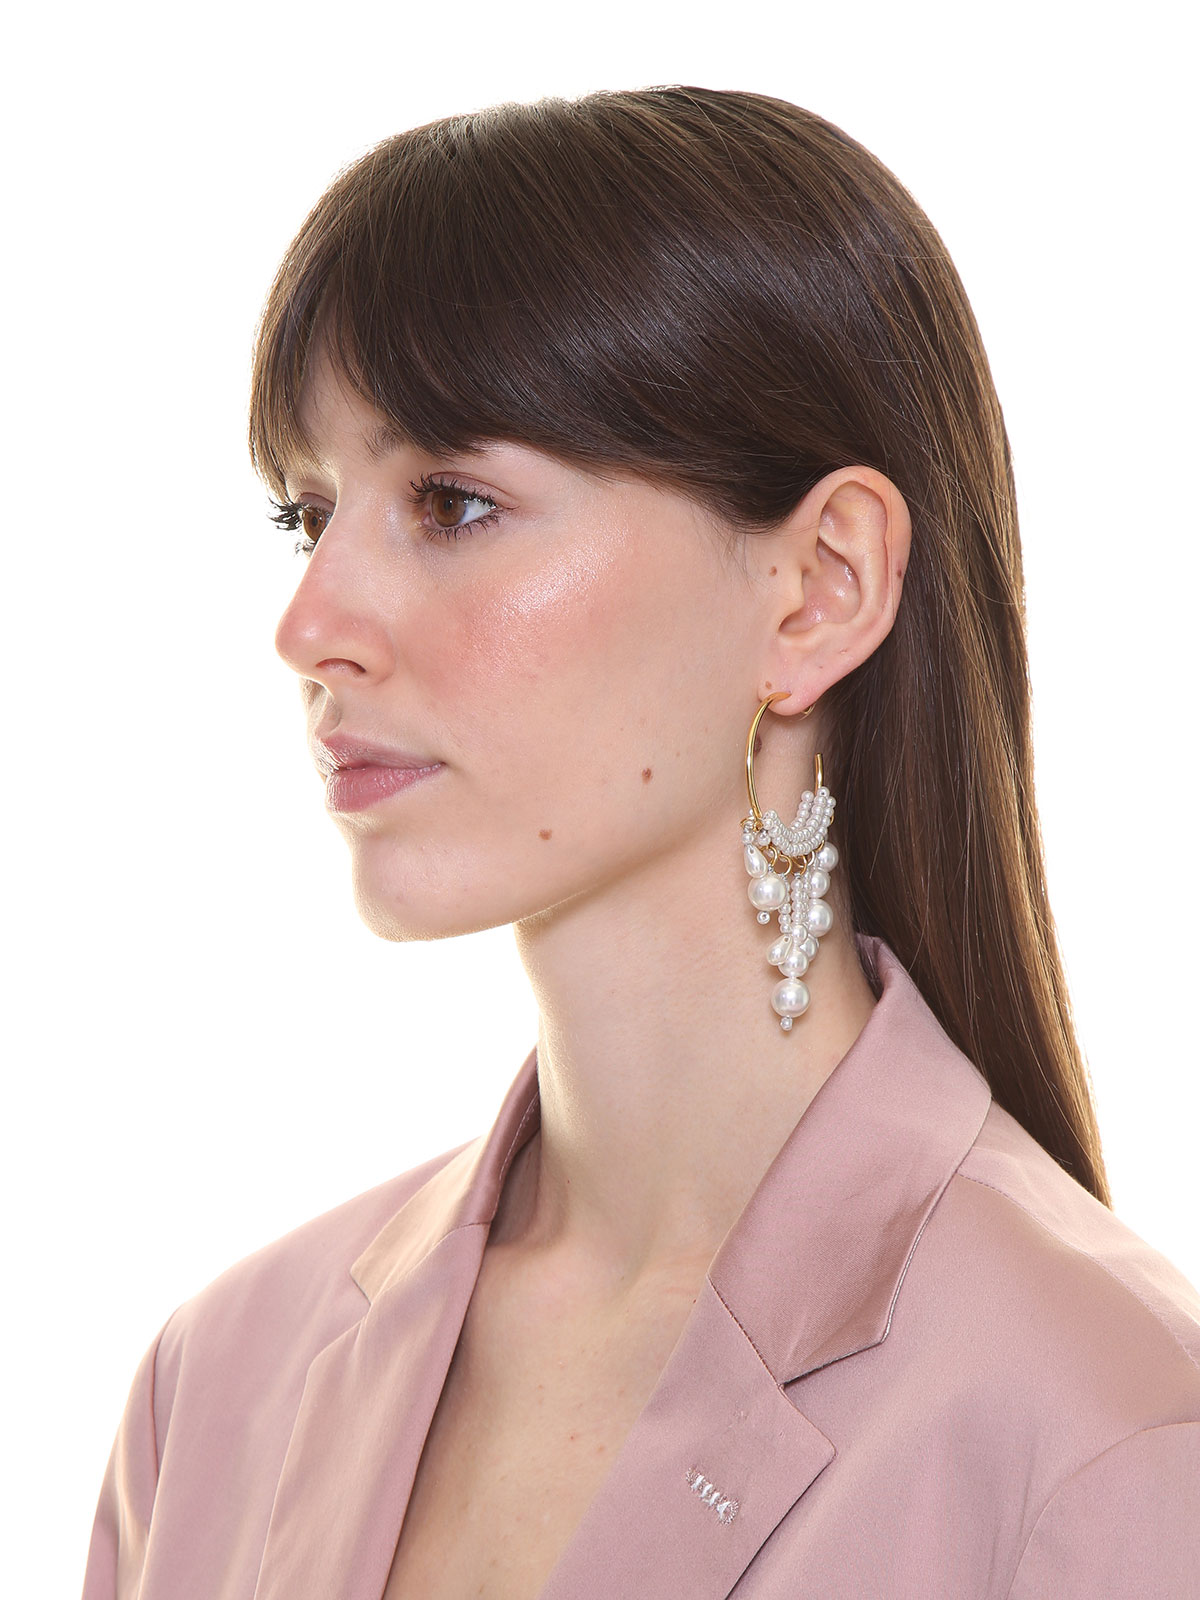 Hoop earrings with pendent beads and pearls